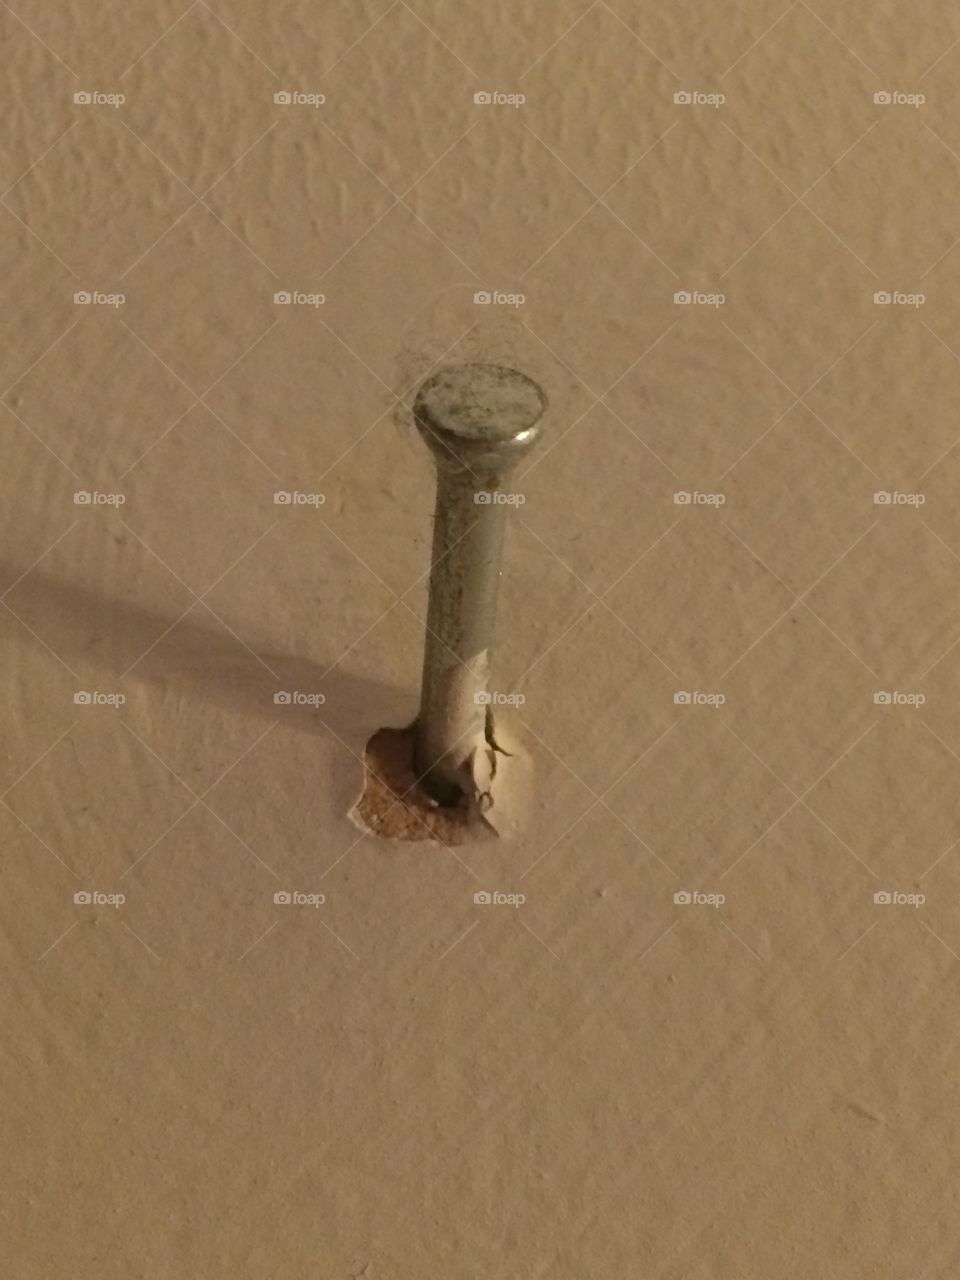 Nail in the wall